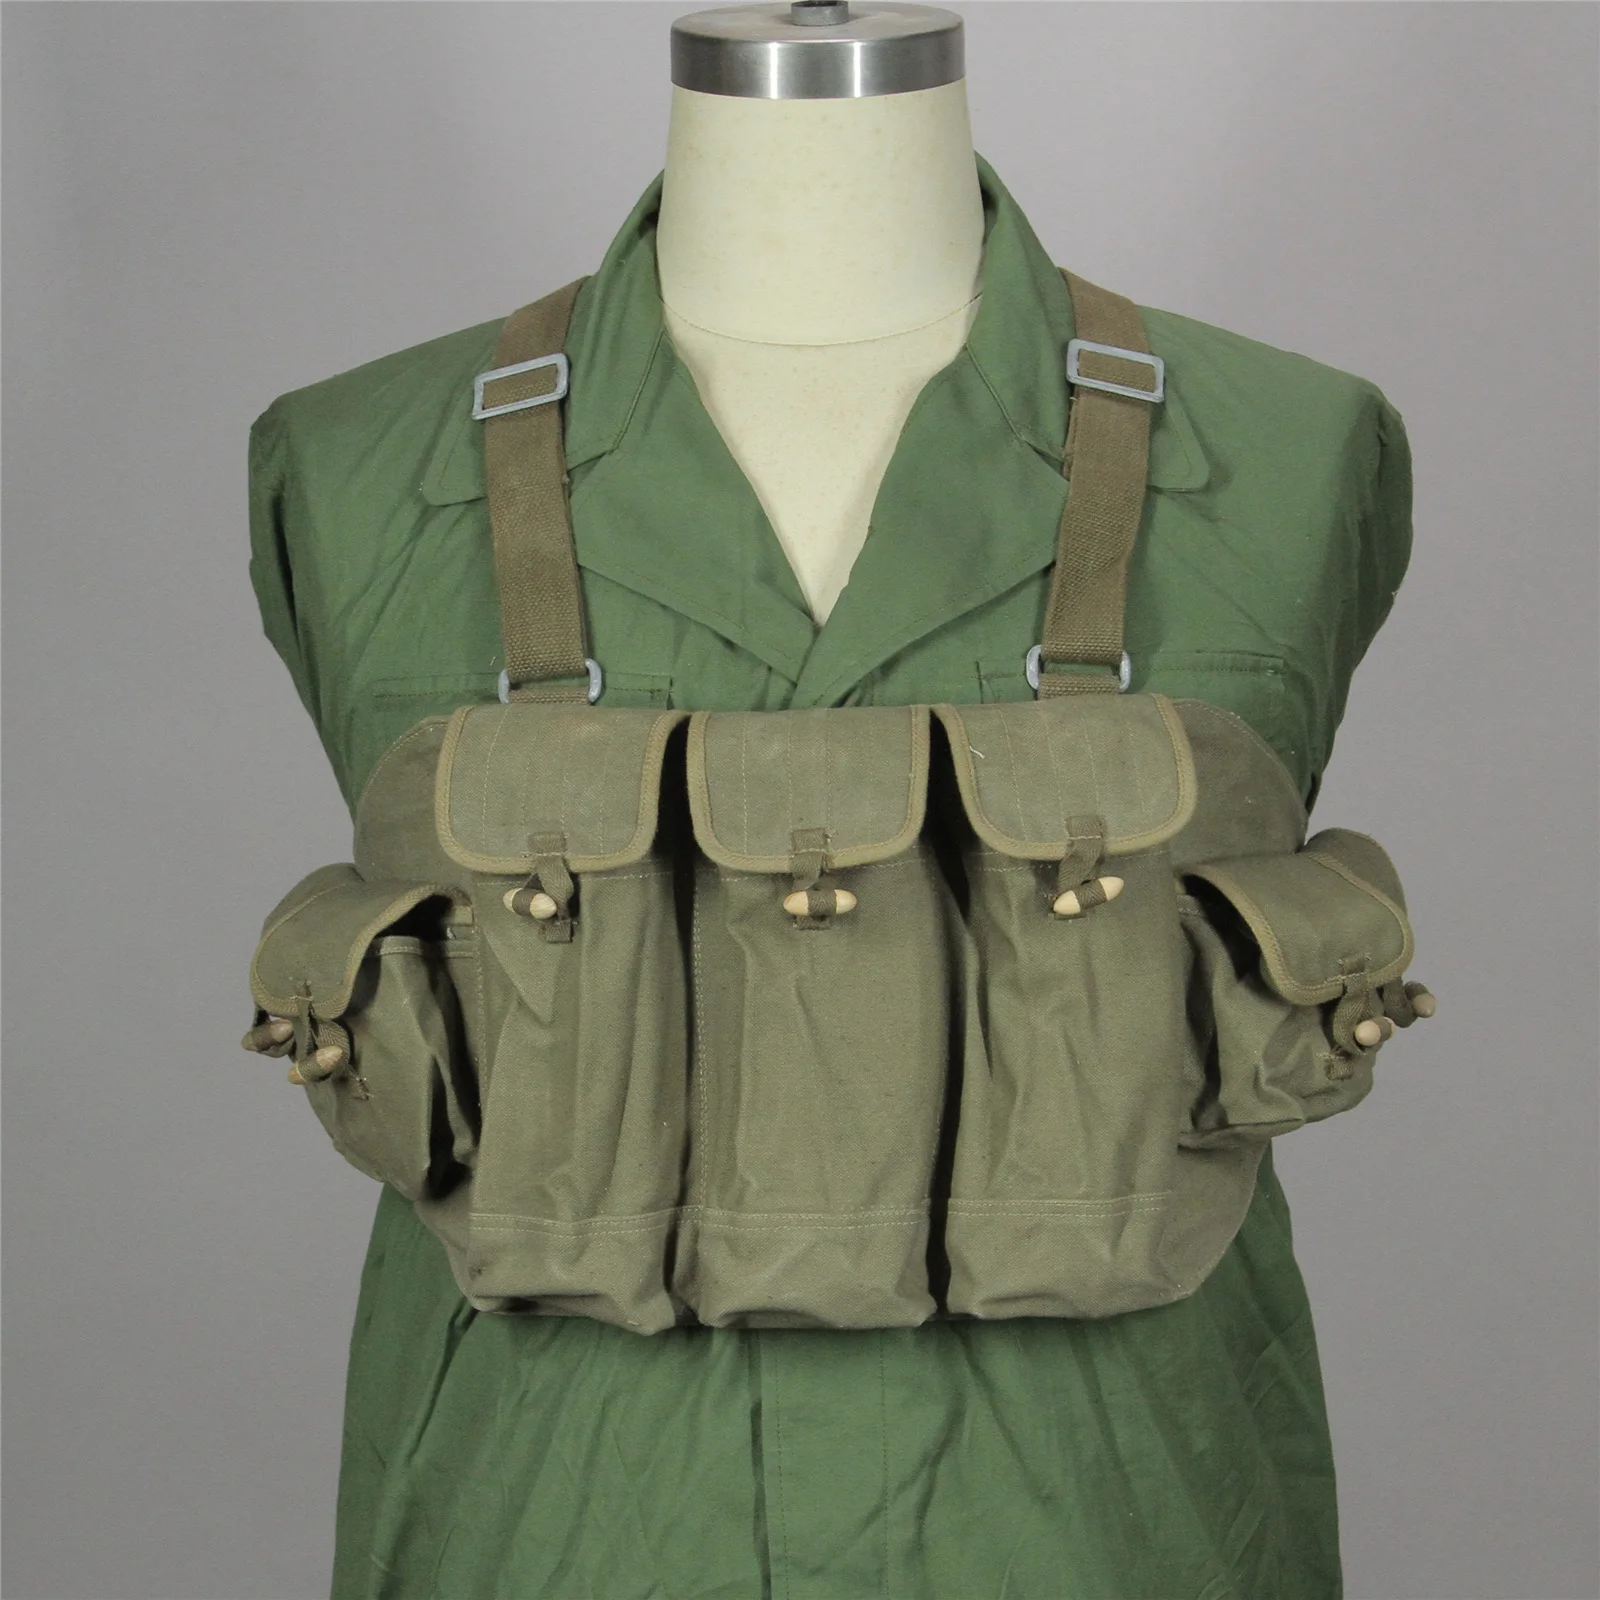 

Original Chinese Army Military Surplus Vietnam War VC NVA Made in 1965 Chicom Type 56 AK Chest Rig Ammo Bandolier Pouch Marked